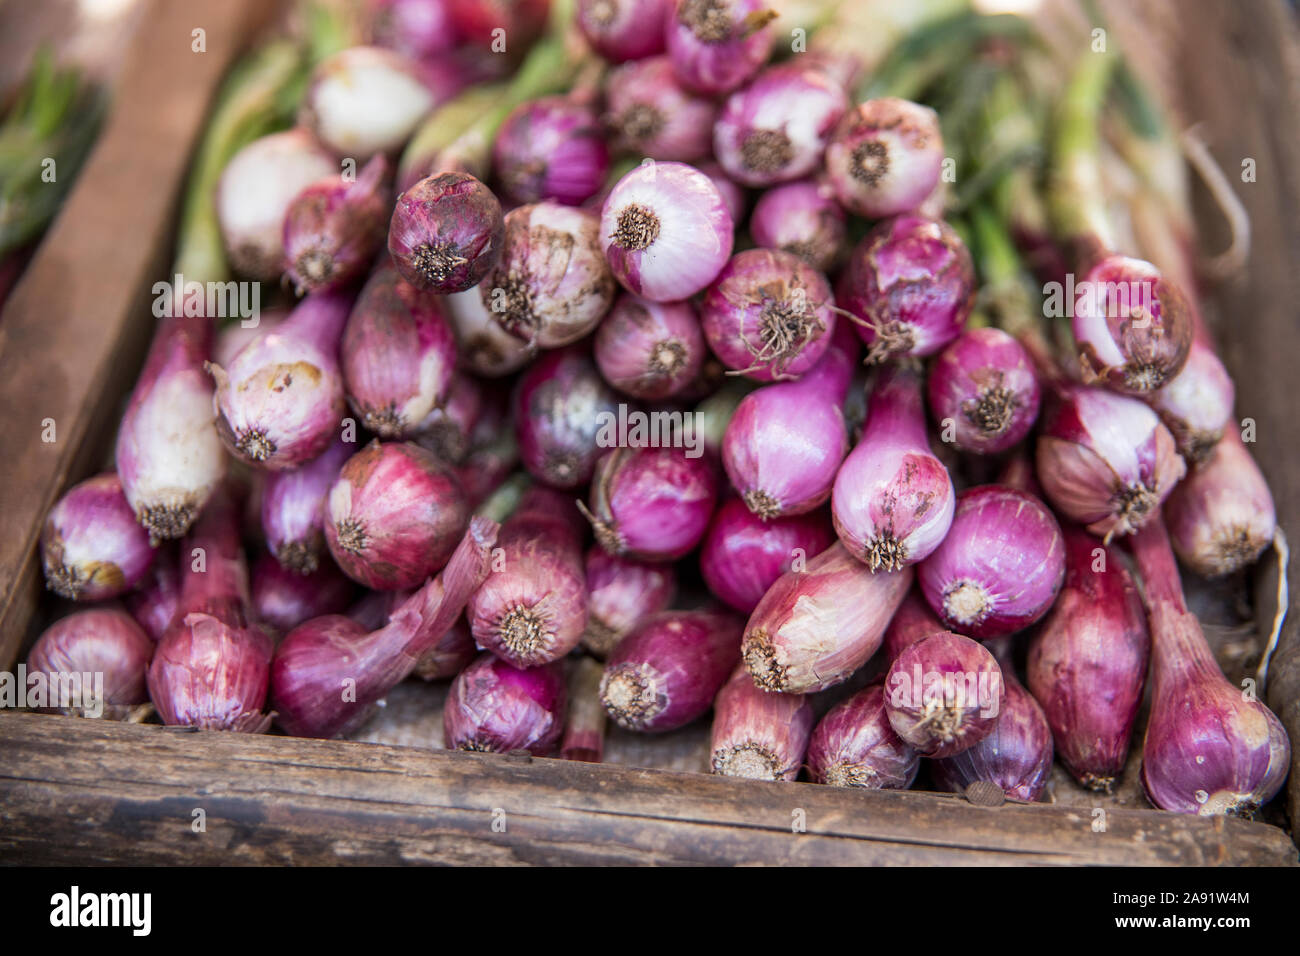 Red onions Stock Photo